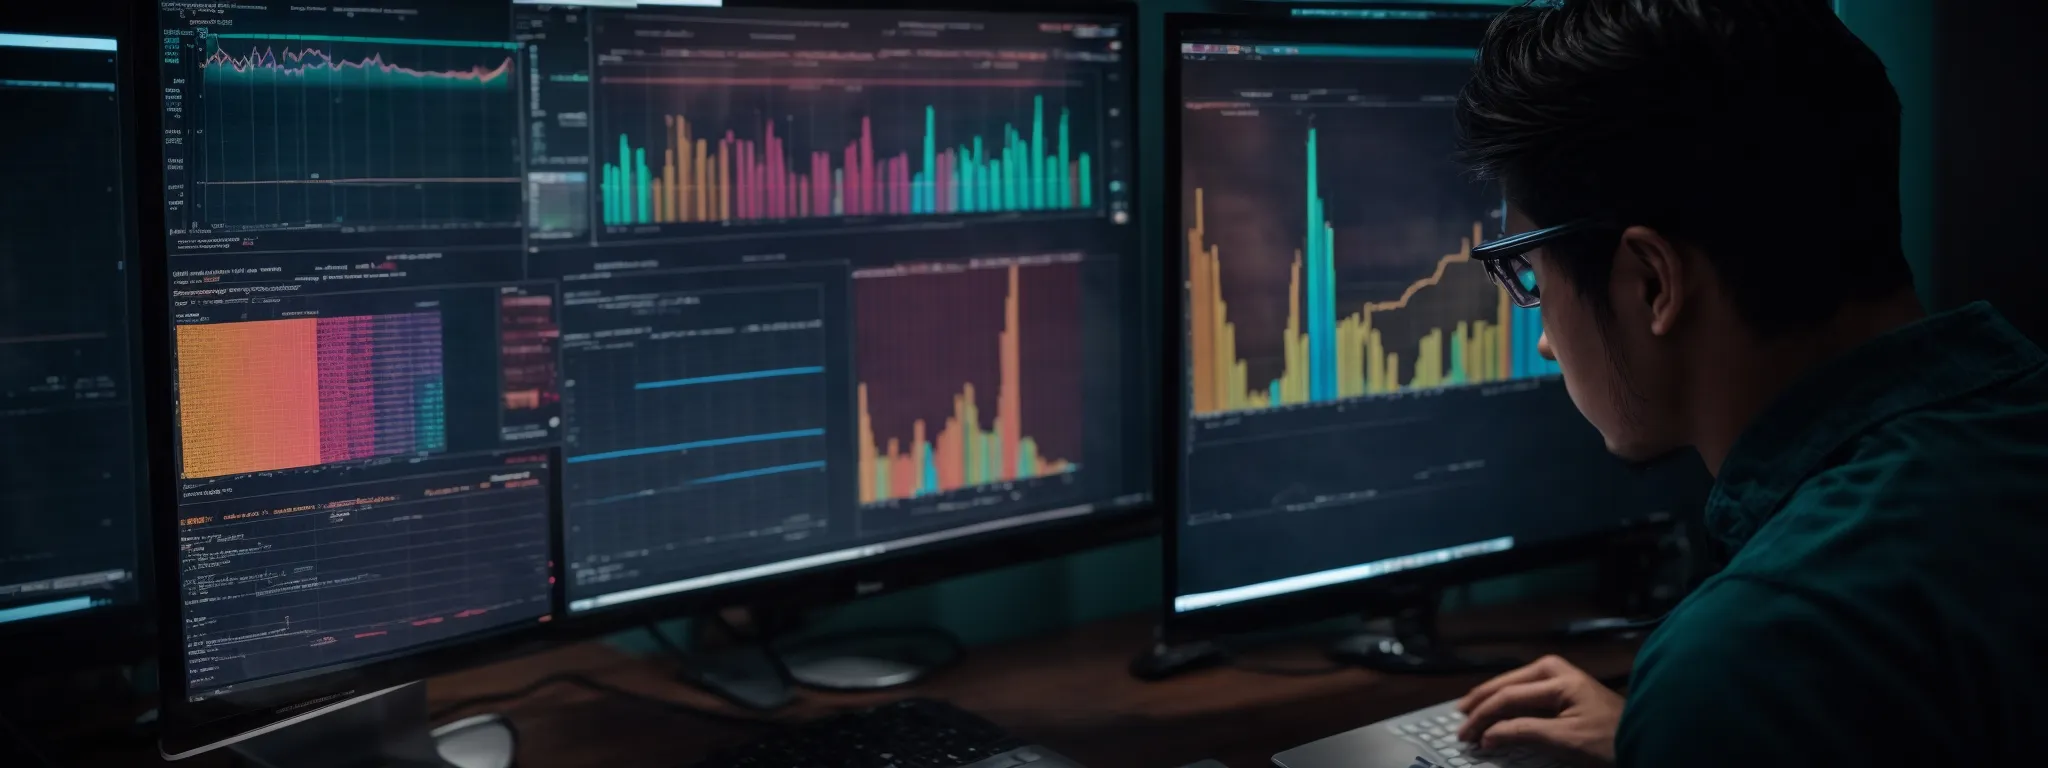 a focused individual analyzing colorful graphs and analytics on a computer screen, revealing user behavior patterns.